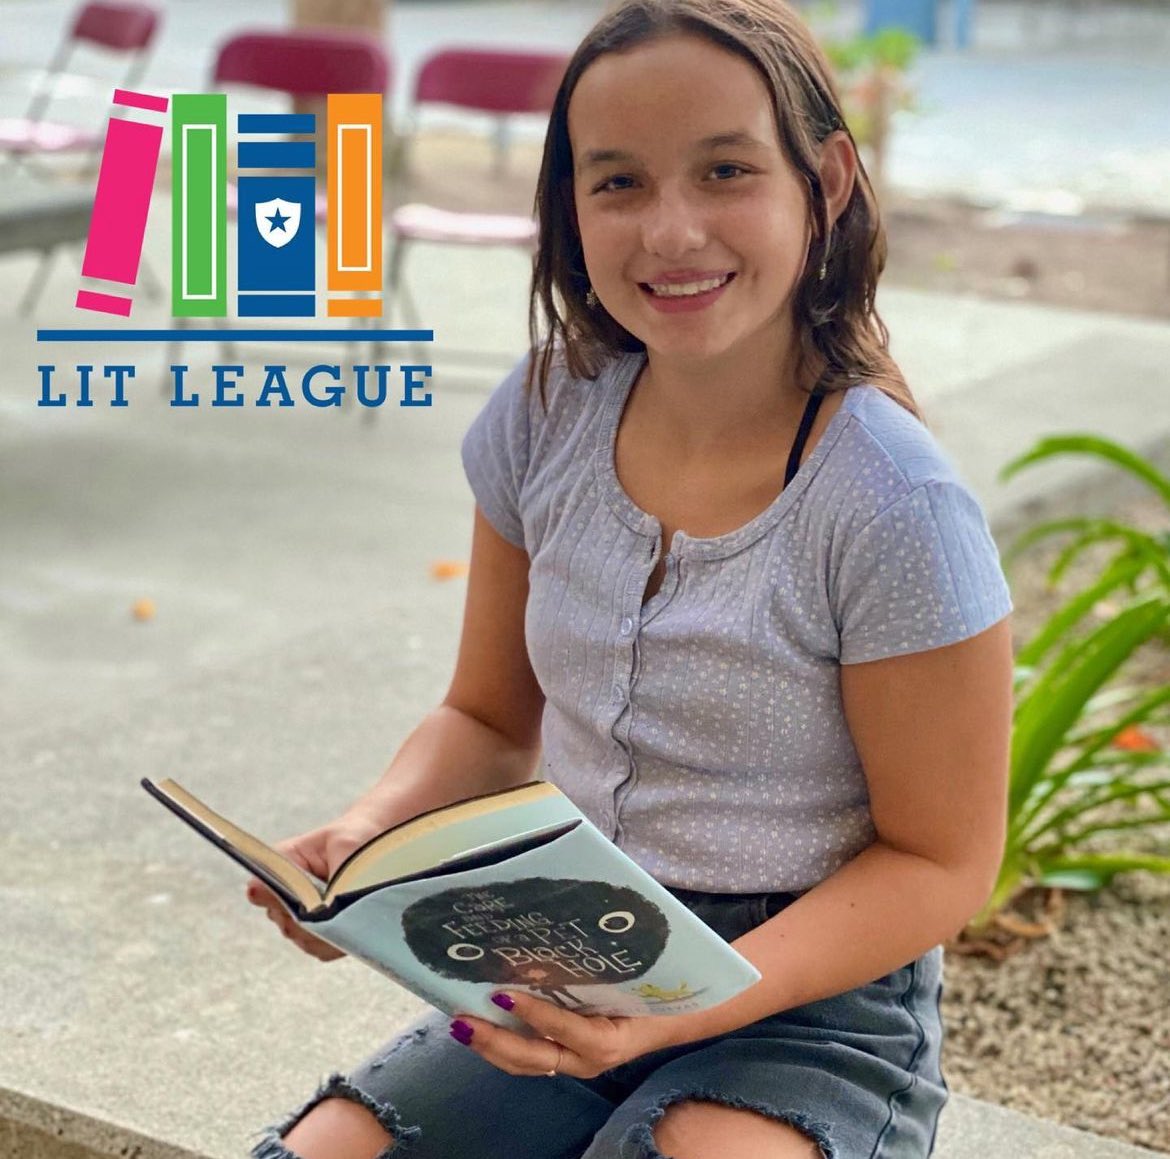 Dreaming of space with the coming eclipse? Extend the fun with your kids with one of Lit League’s space-themed book boxes! 🚀
#eclipse #litleagueboxes #spacebook #stemactivities #stemactivitiesforkids #readingactivities